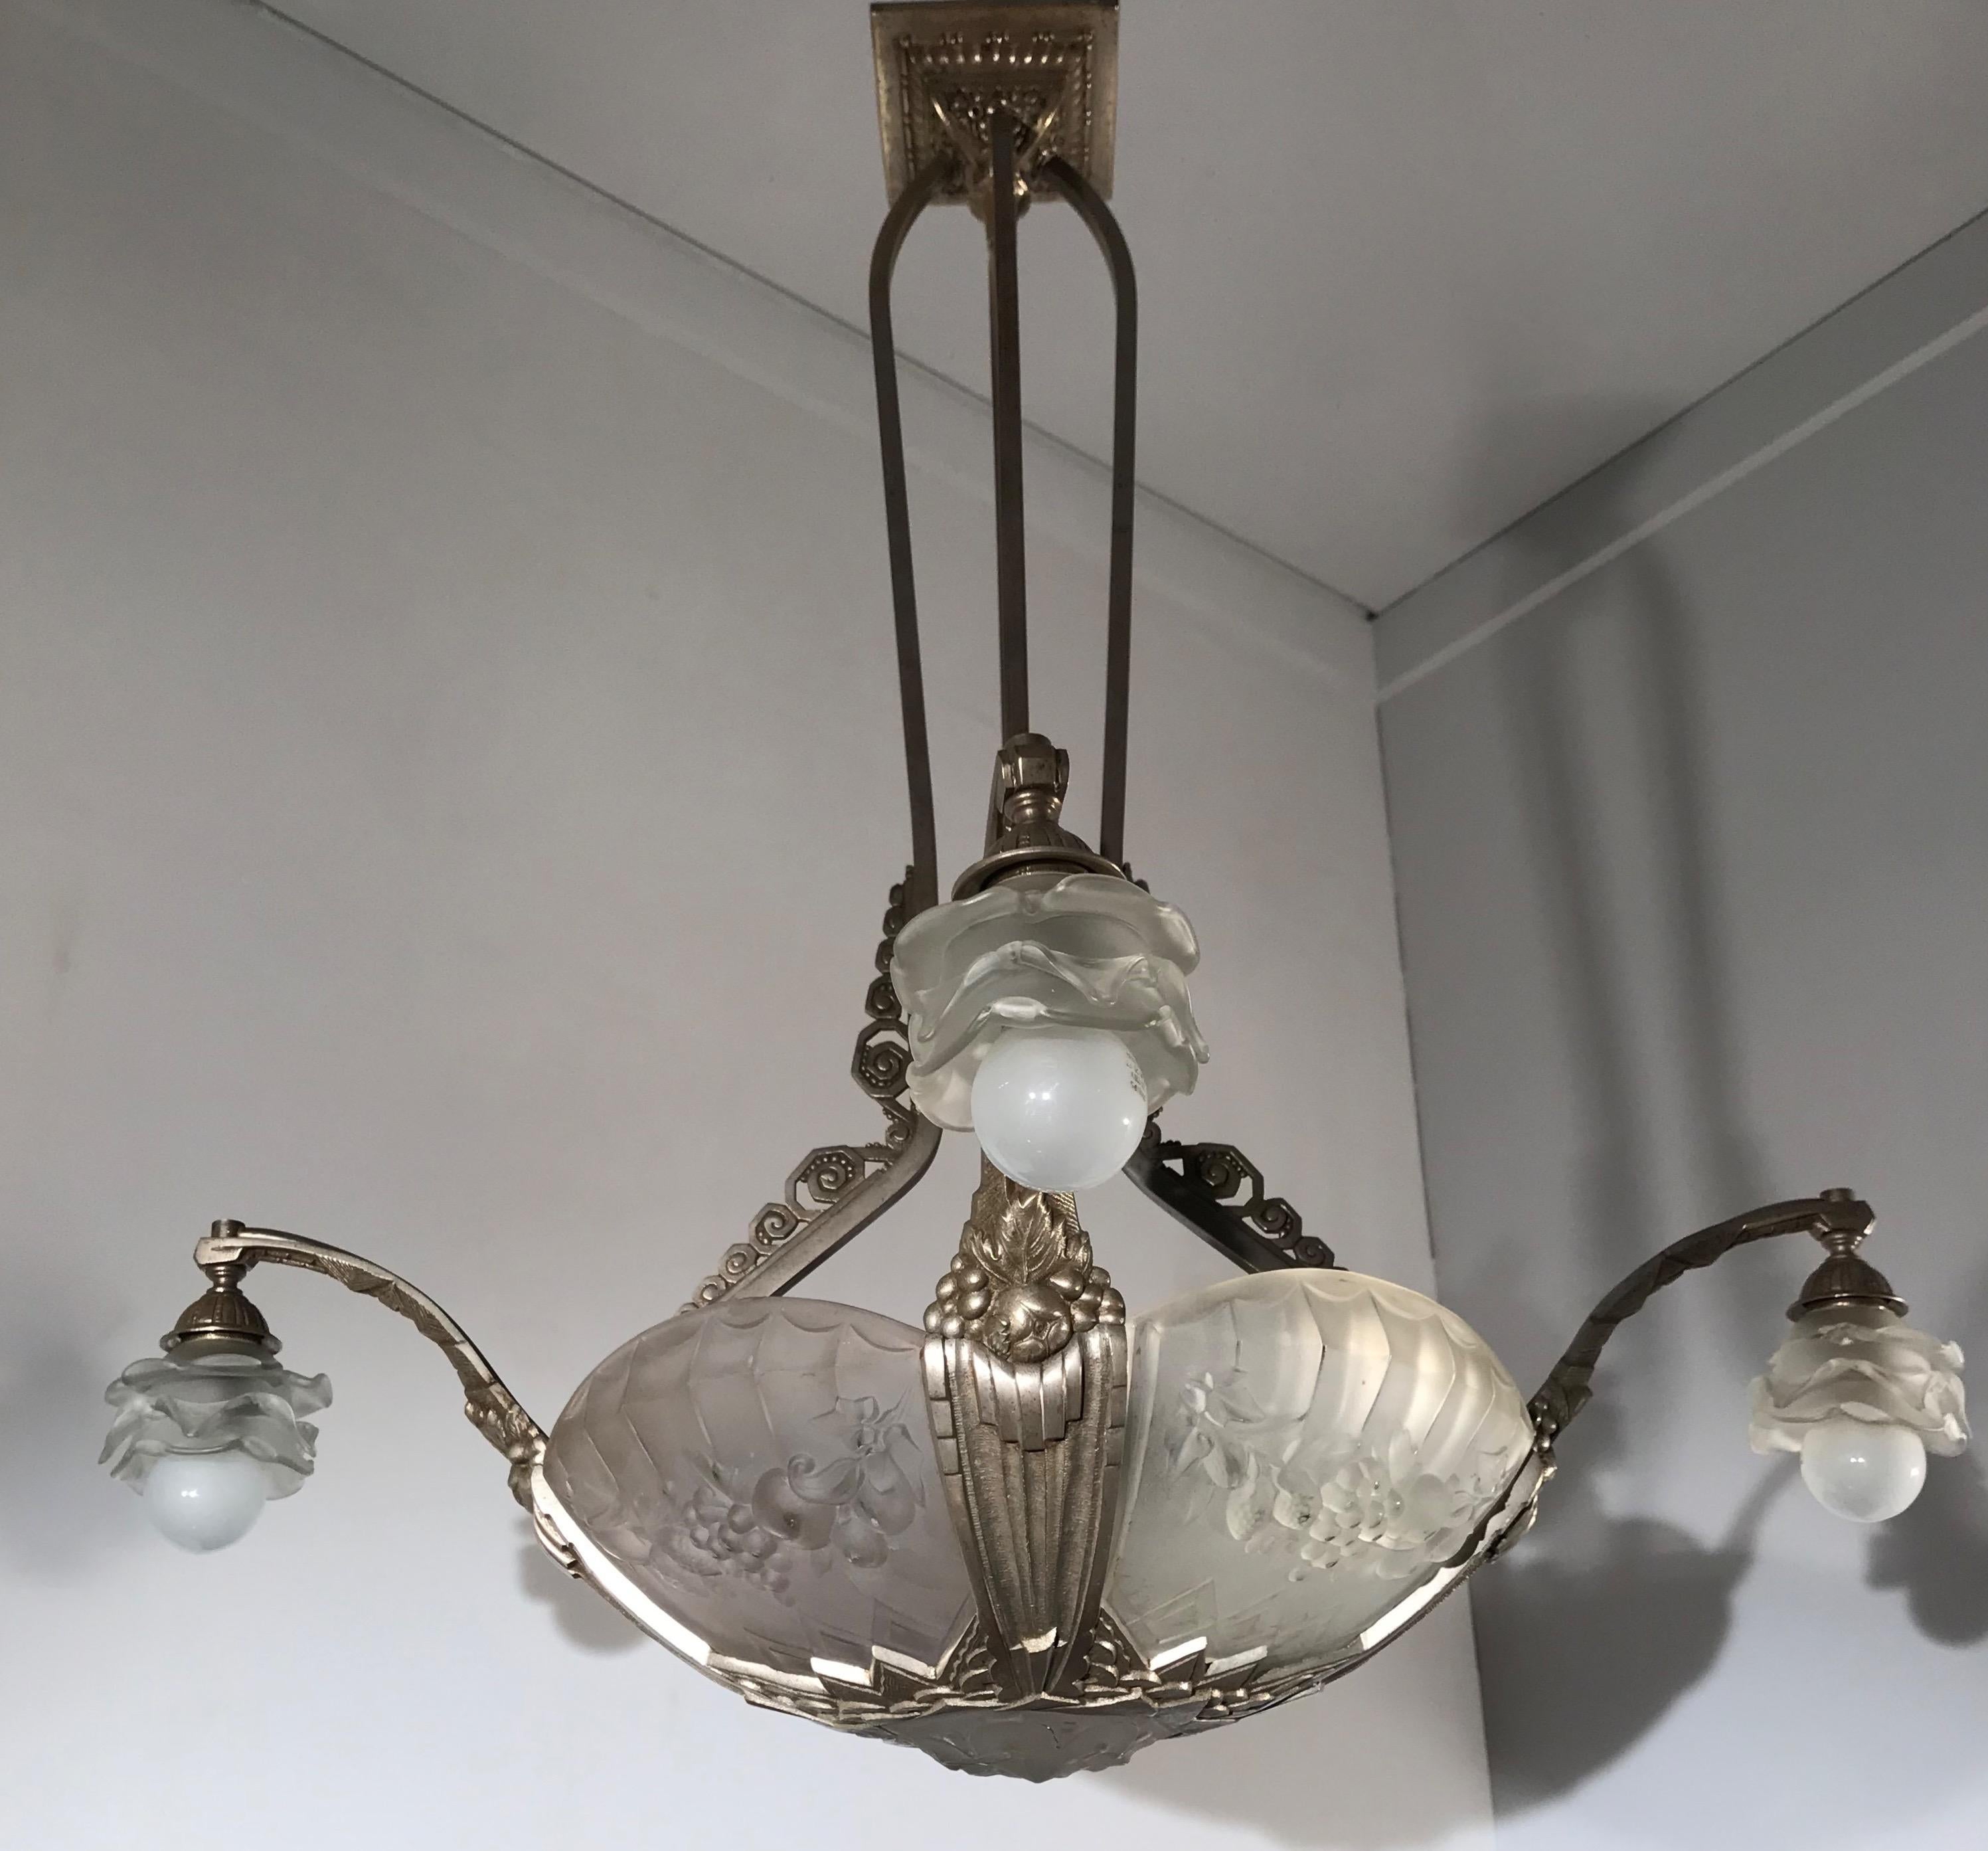 Stunning 1930s Art Deco Glass and Bronze Pendant Chandelier by P. Gilles, France 1